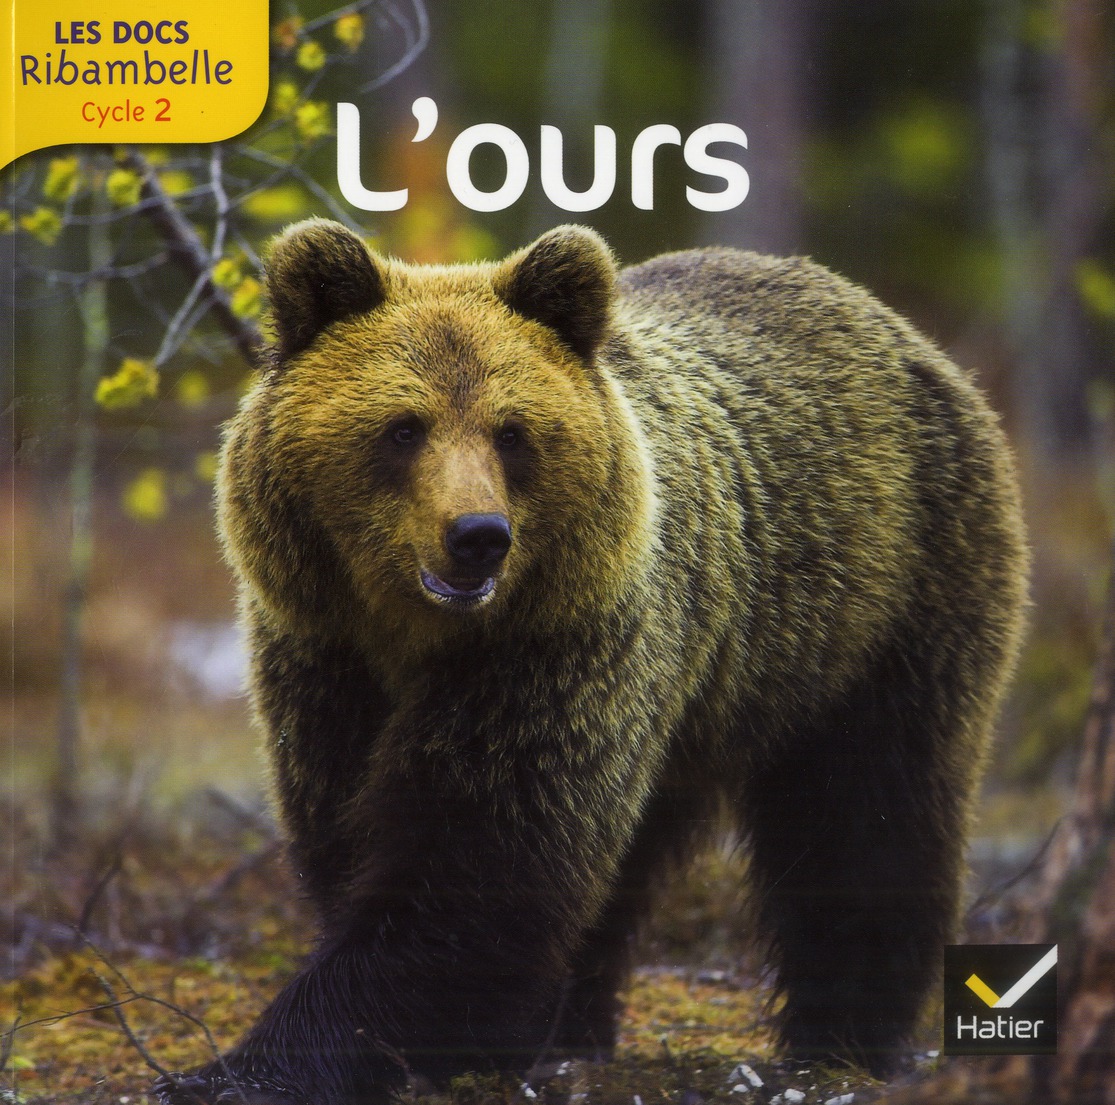 LES DOCS RIBAMBELLE CYCLE 2 ED. 2013 - L'OURS